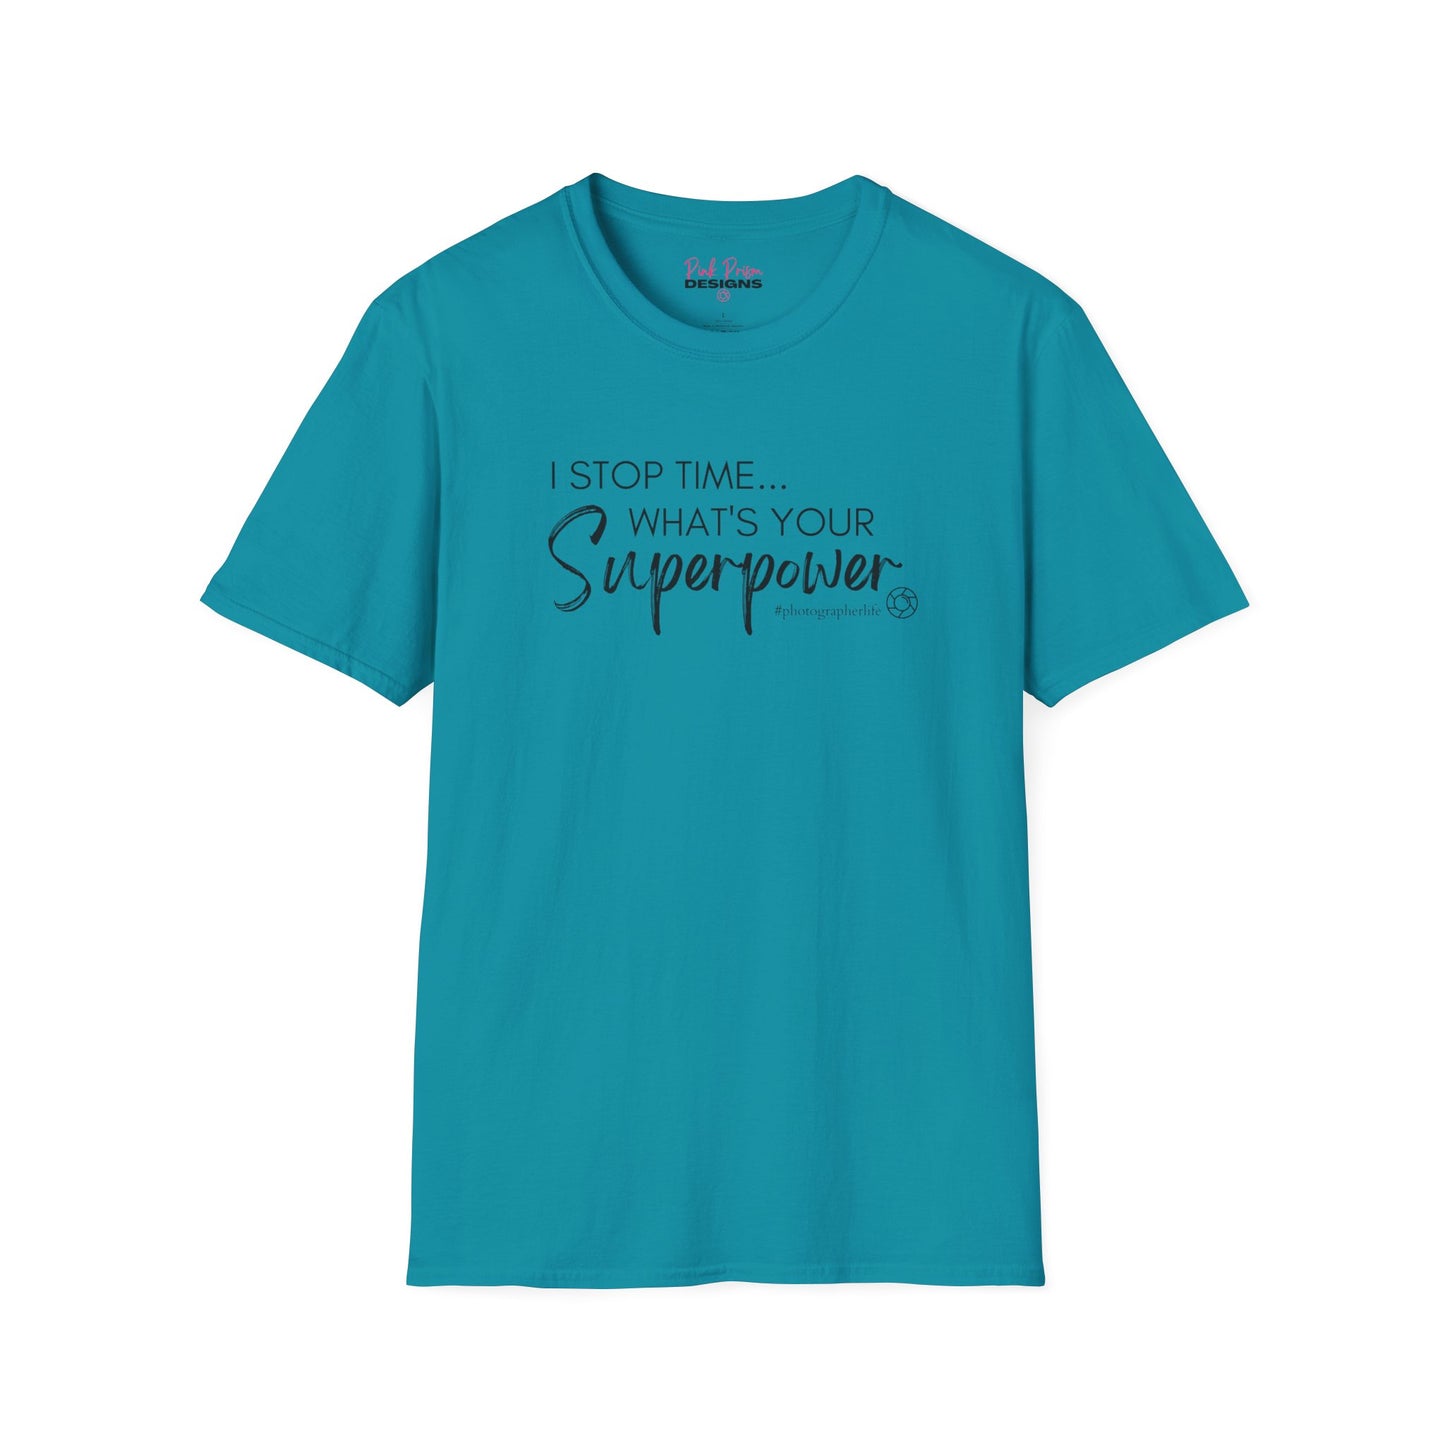 Superpower - Softstyle T-Shirt